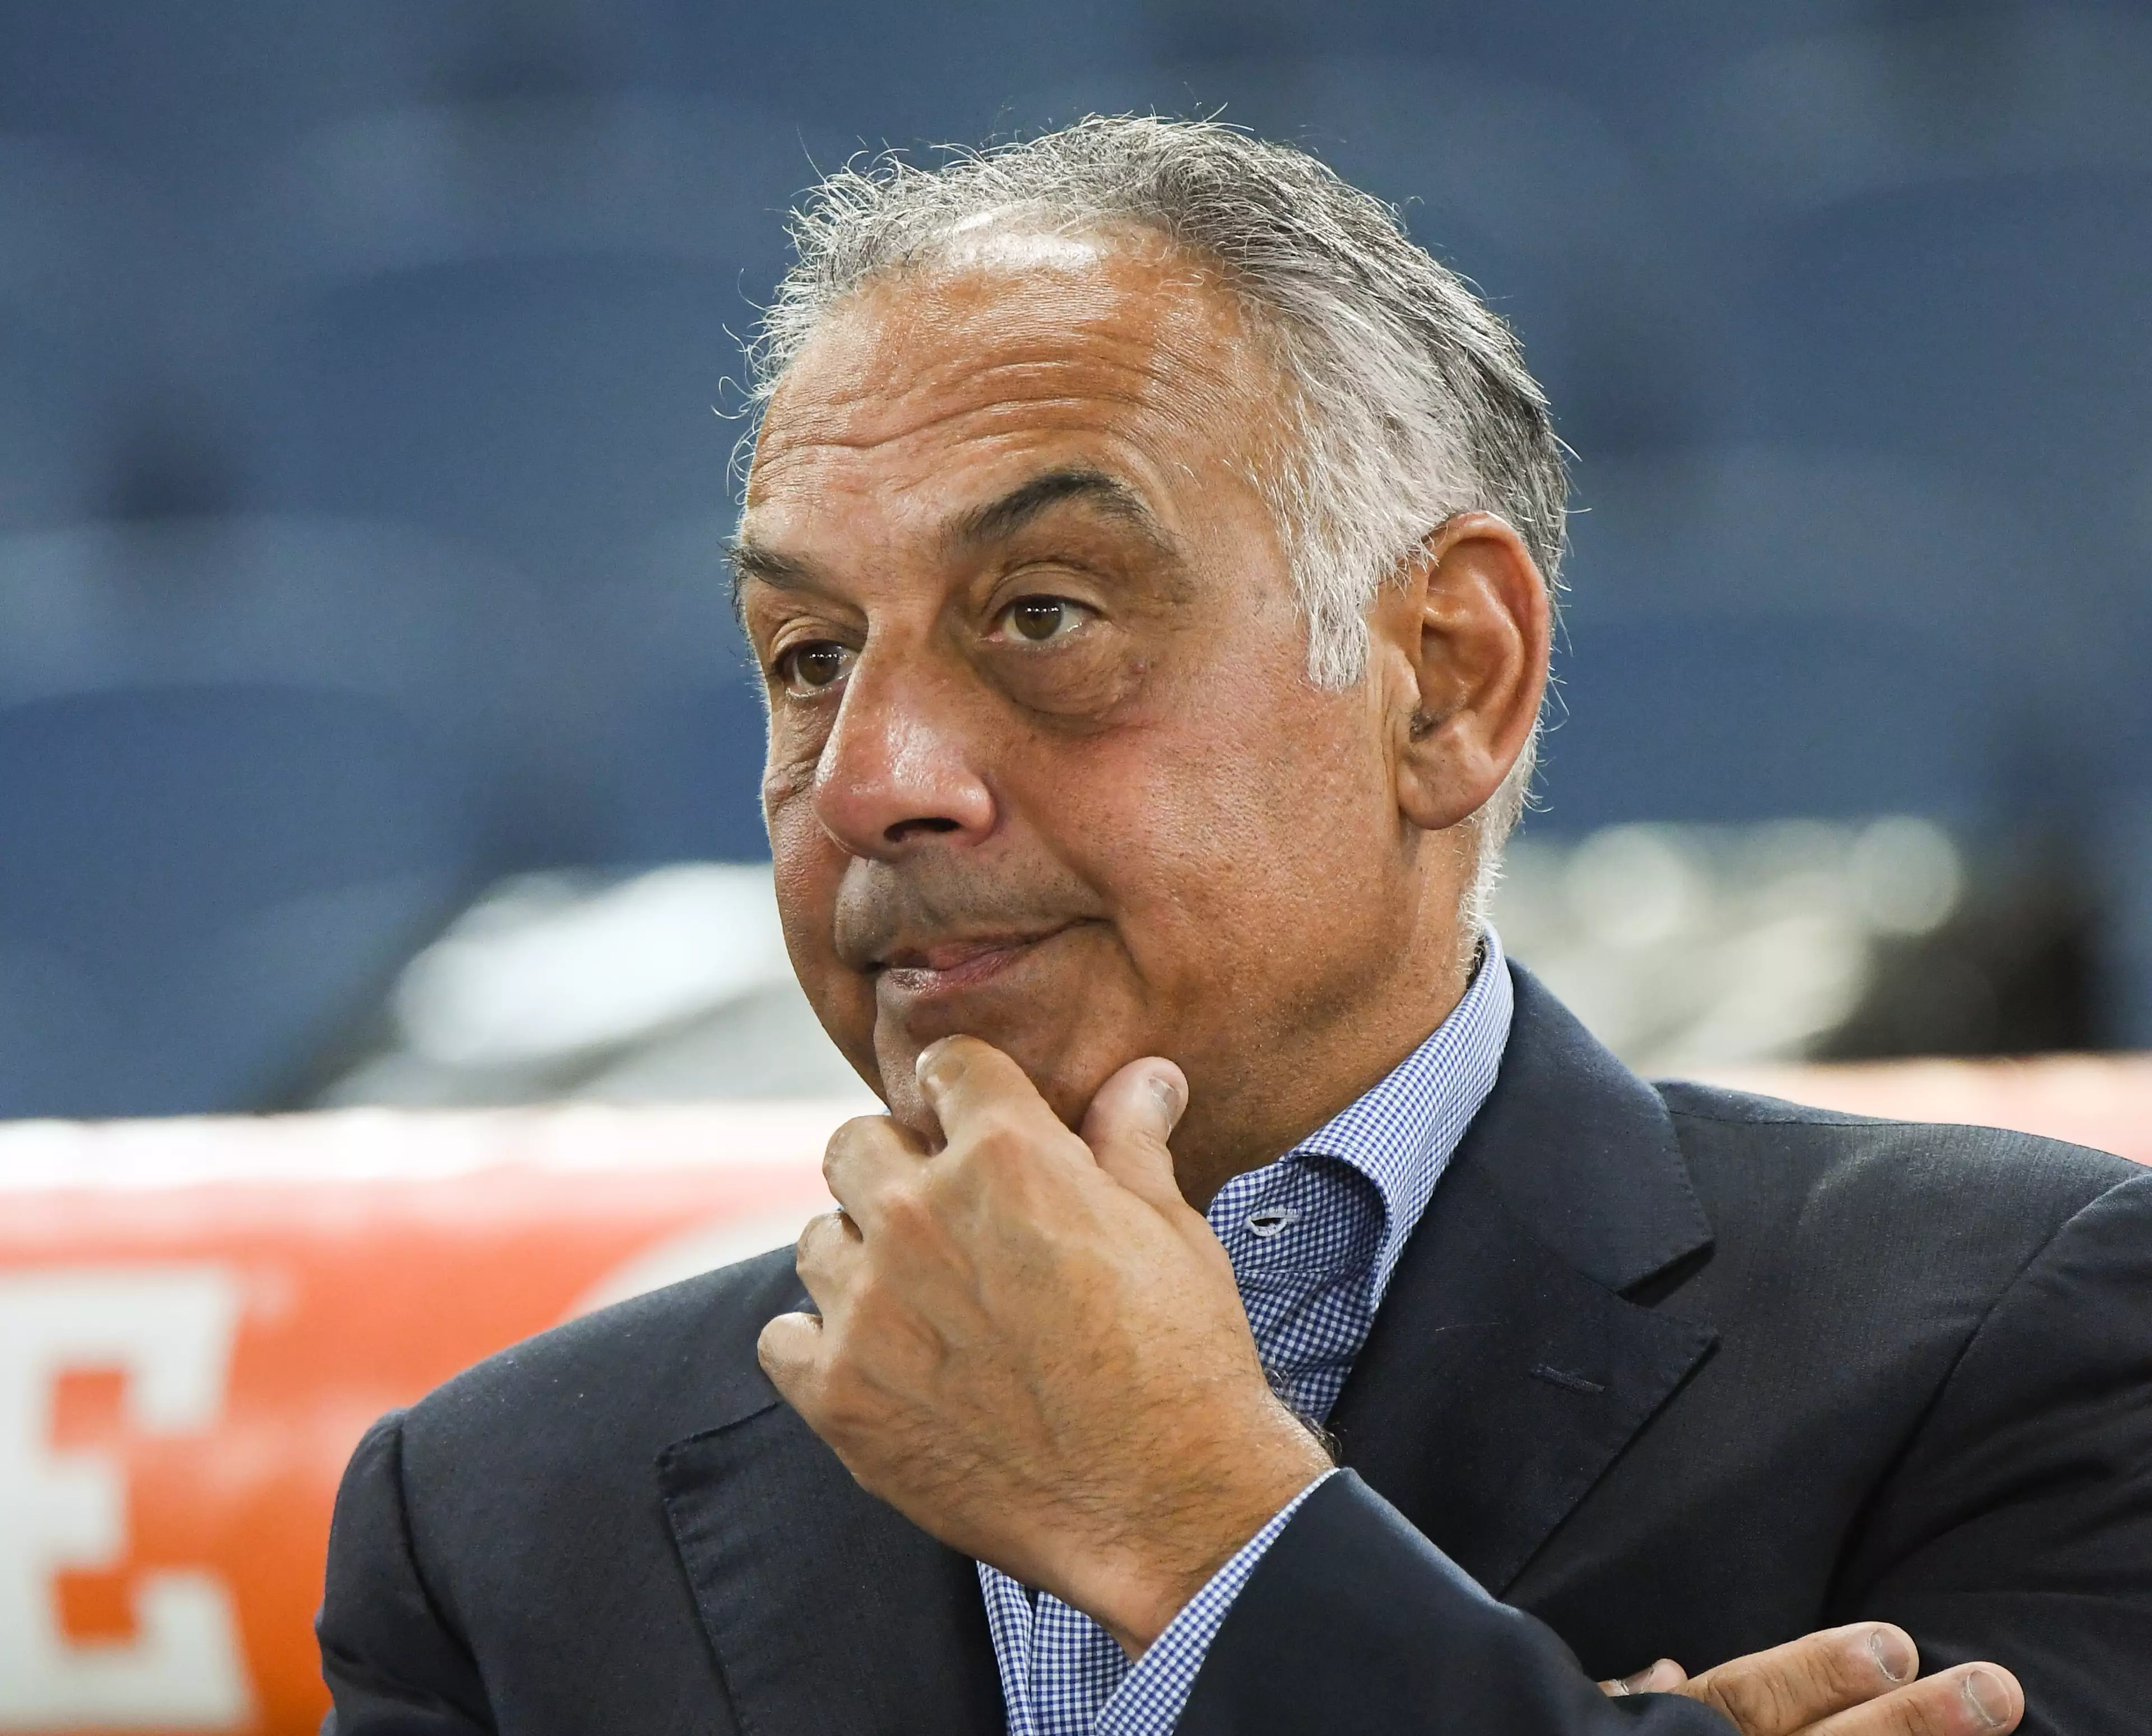 Pallotta is clearly very unhappy. Image: PA Images